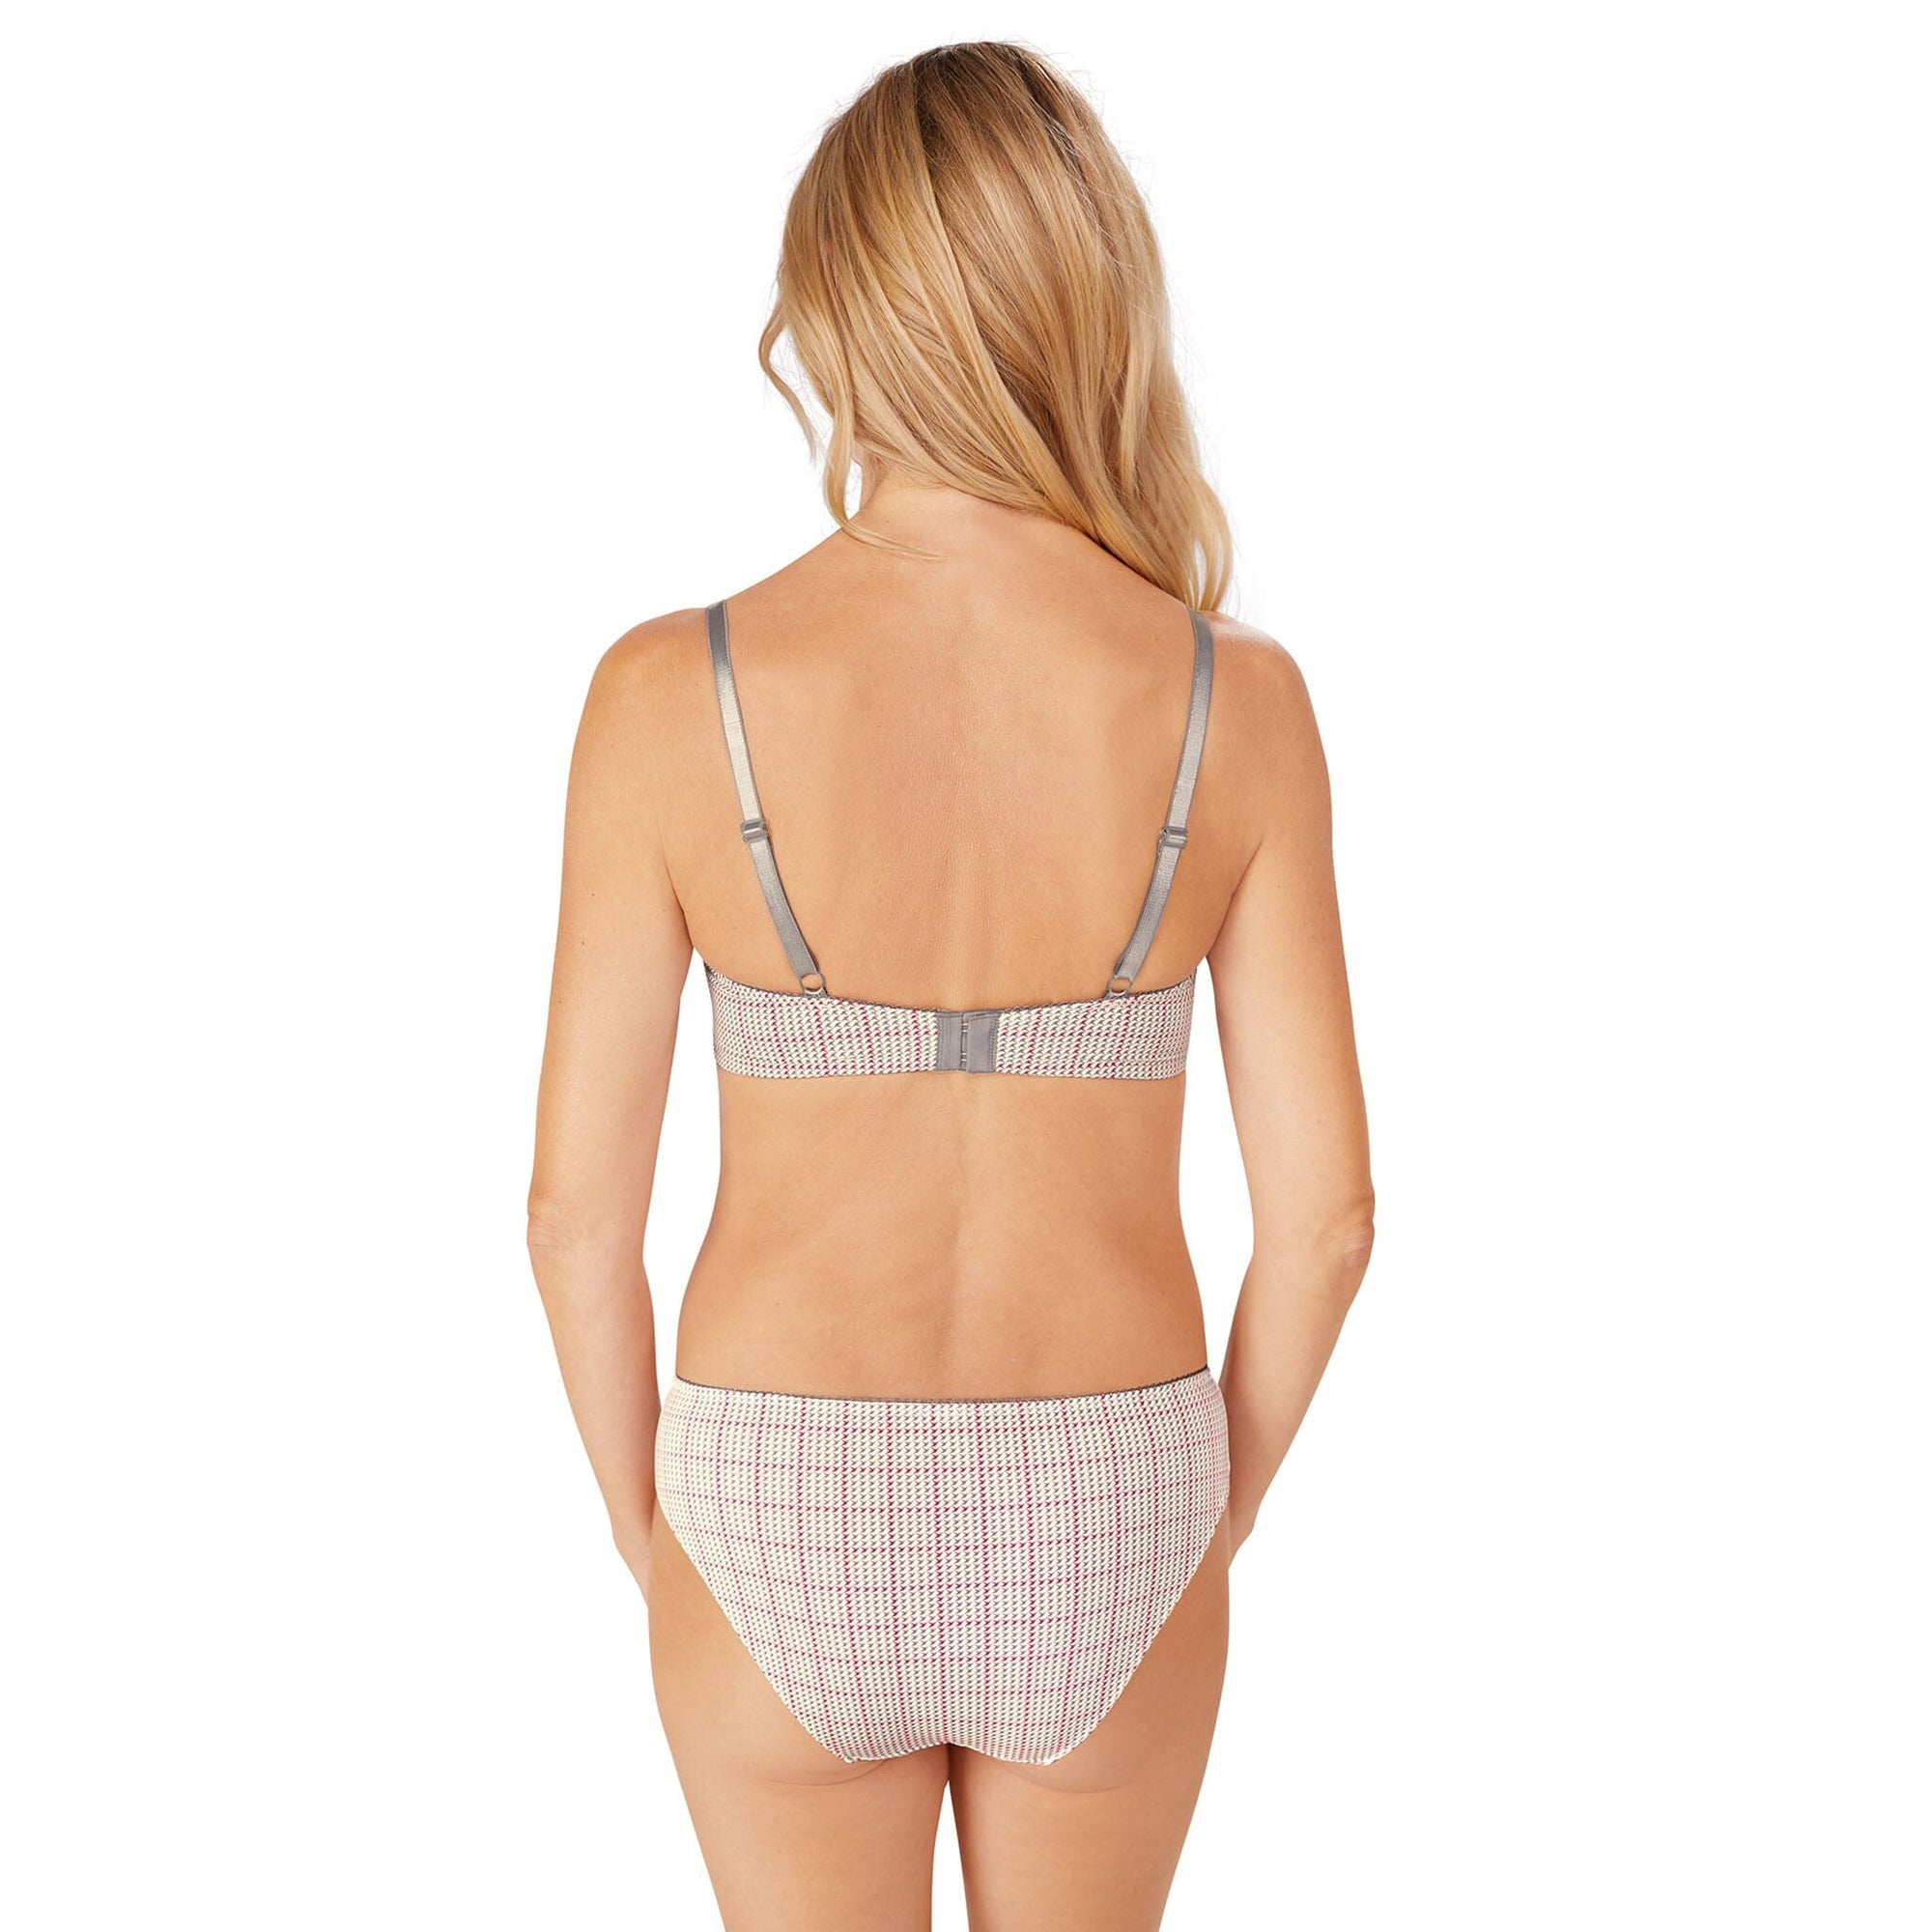 Amoena® Luna Panty Shown in Grey/Multi with Luna Padded Bra (#9605). Front View.